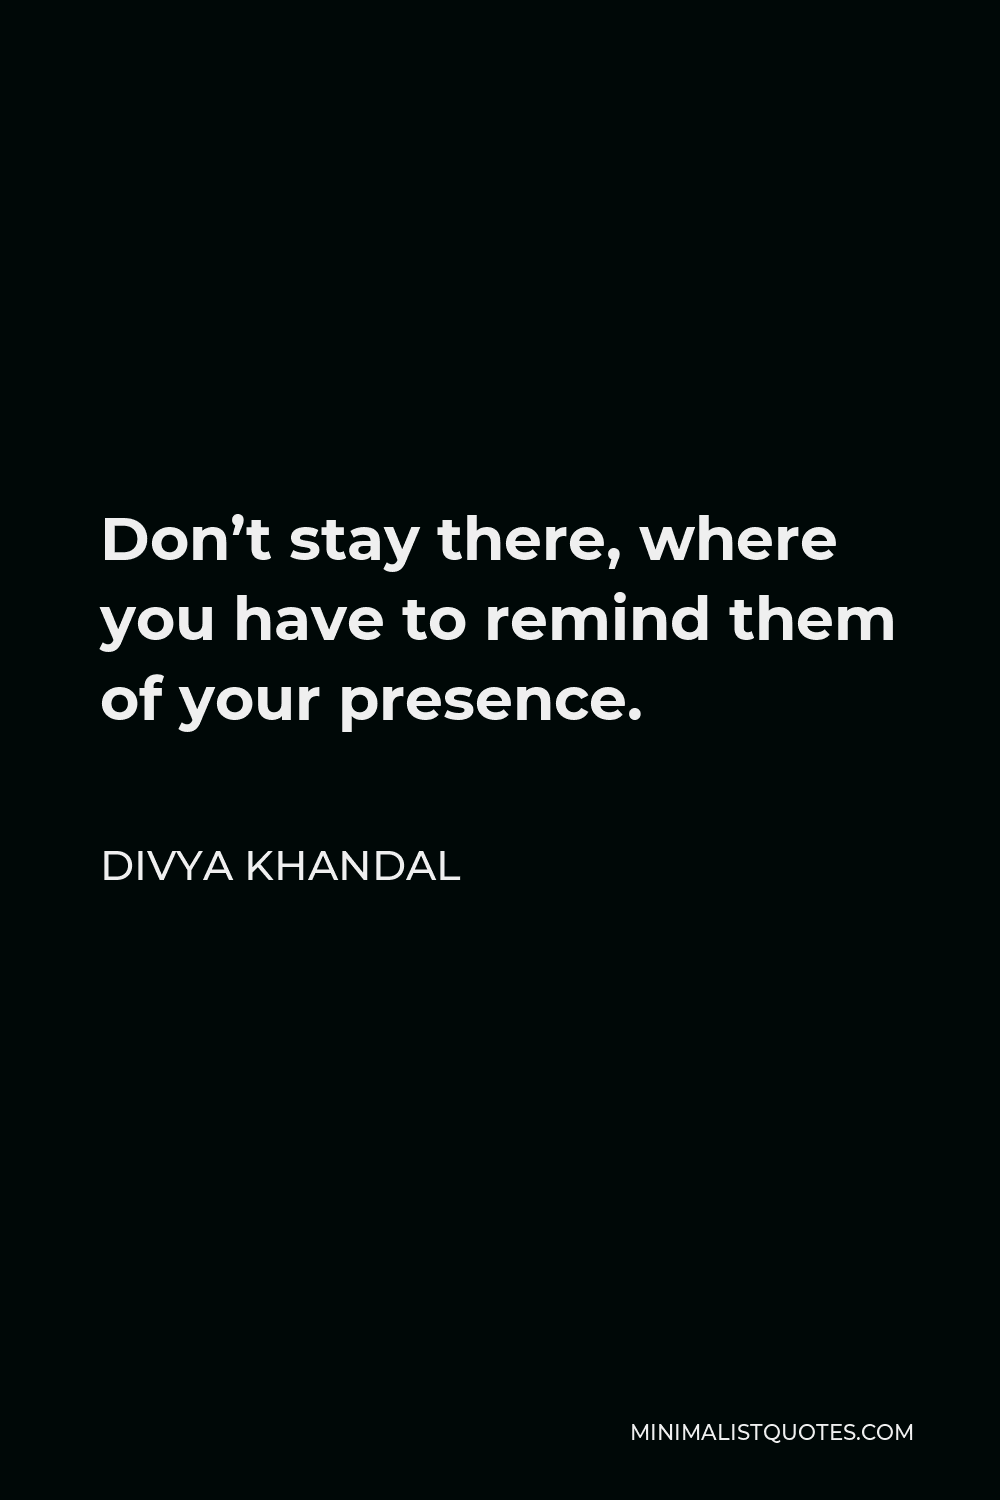 Divya khandal Quote - Don’t stay there, where you have to remind them of your presence.